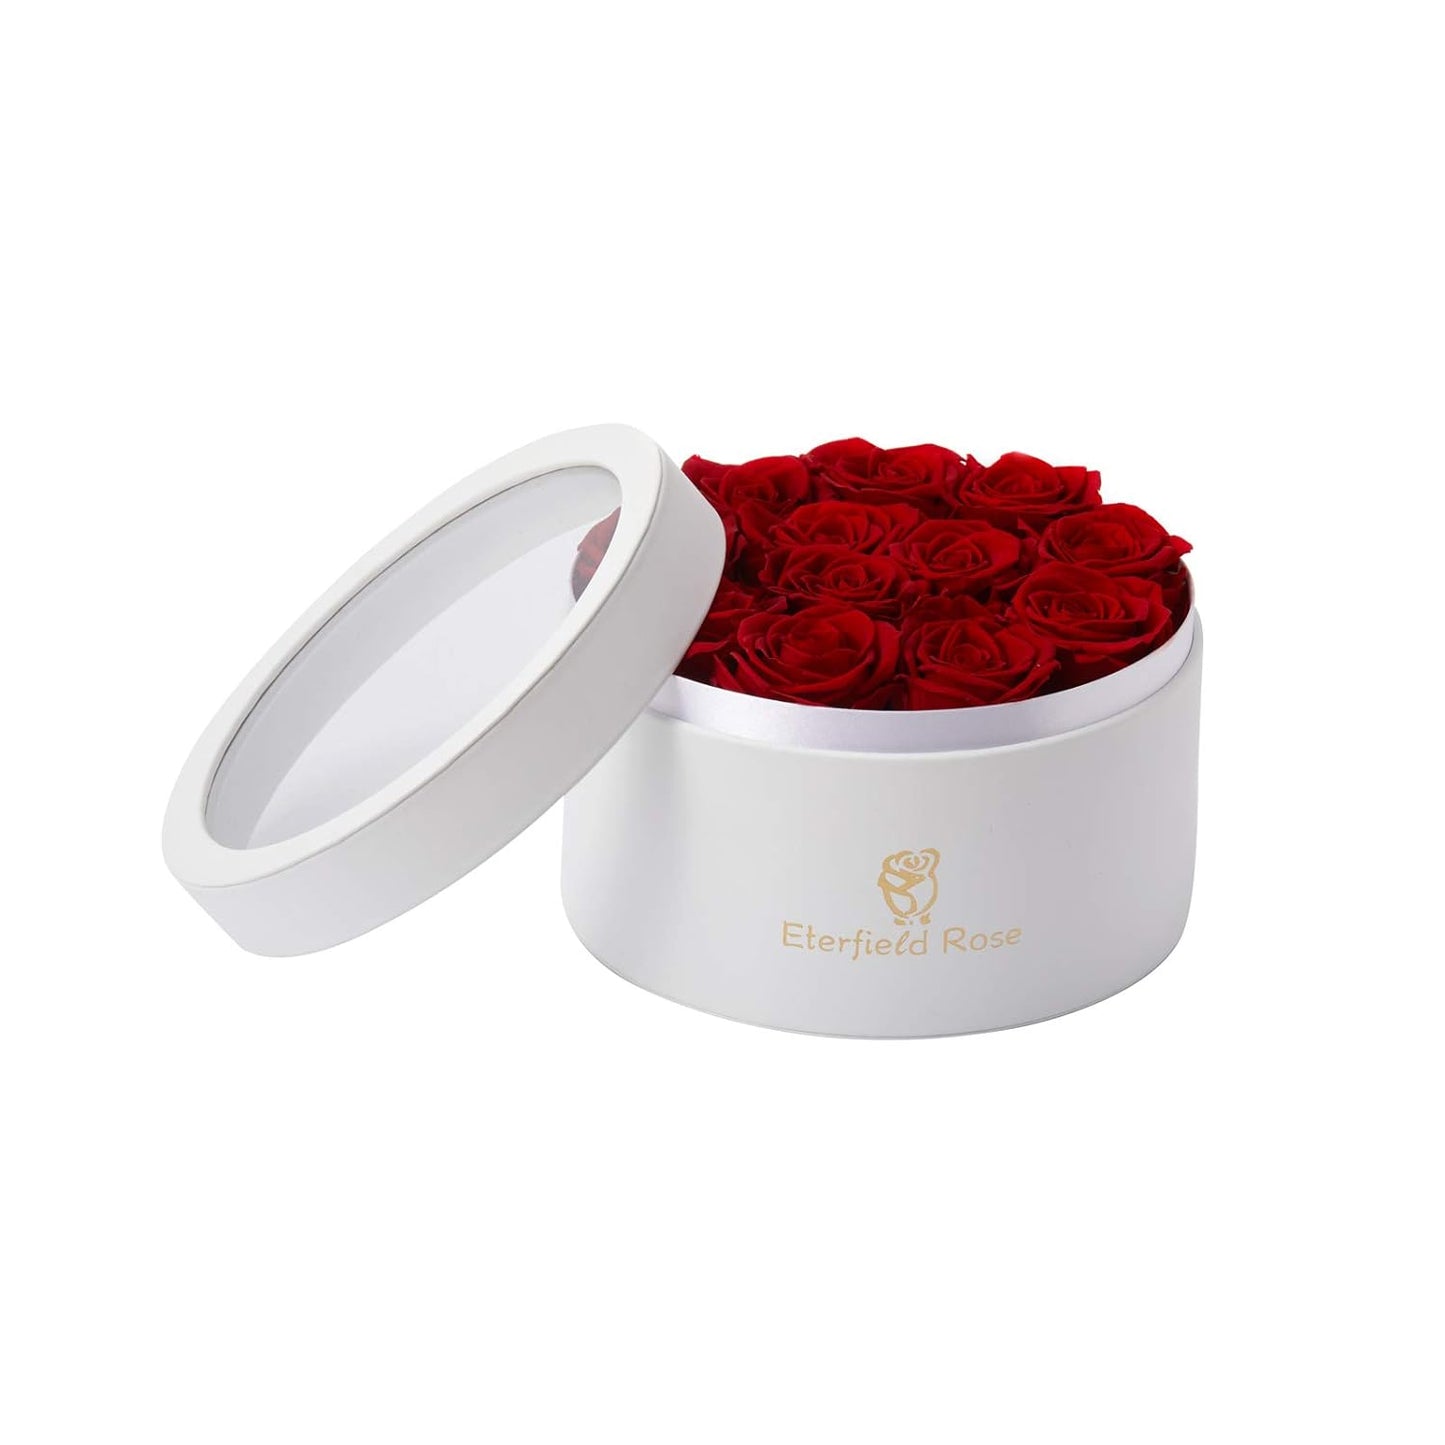 12 Preserved Rose in a Box Real Roses That Last a Year Preserved Flowers for Delivery Prime Gift for Her Valentines Day Mother Day (Red Roses, round White PU Leather Box)